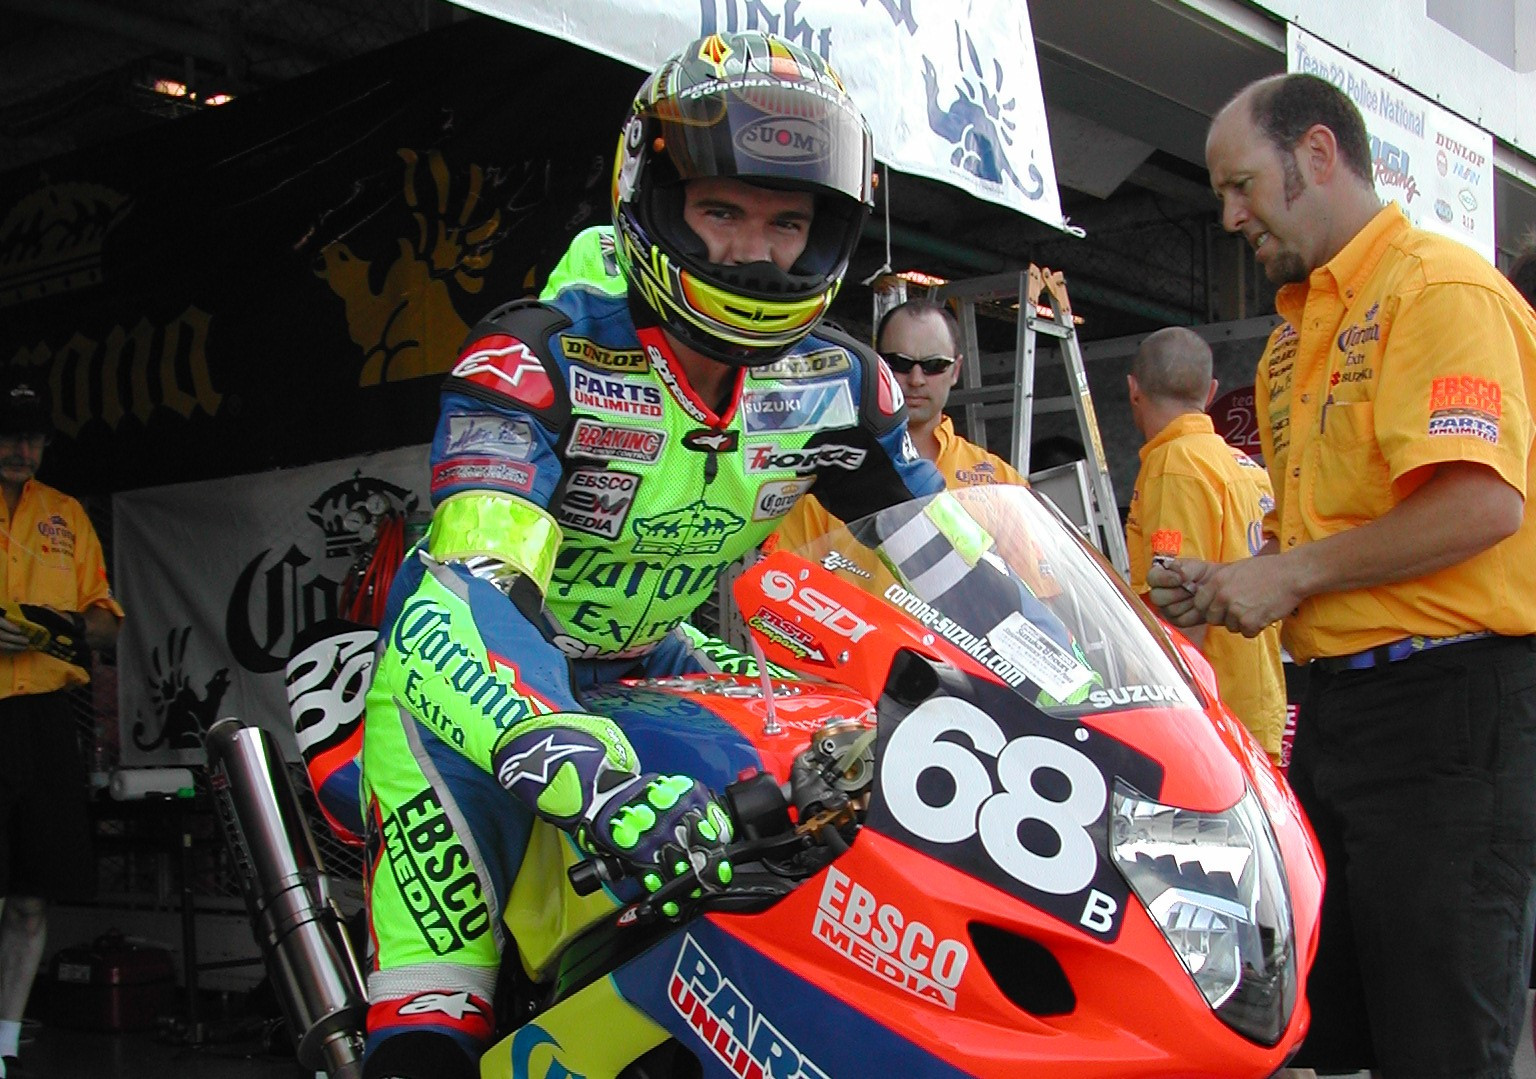 Anthony Gobert (68) preparing to go out on track at the 2003 Suzuka 8-Hours. He and teammate Adam 